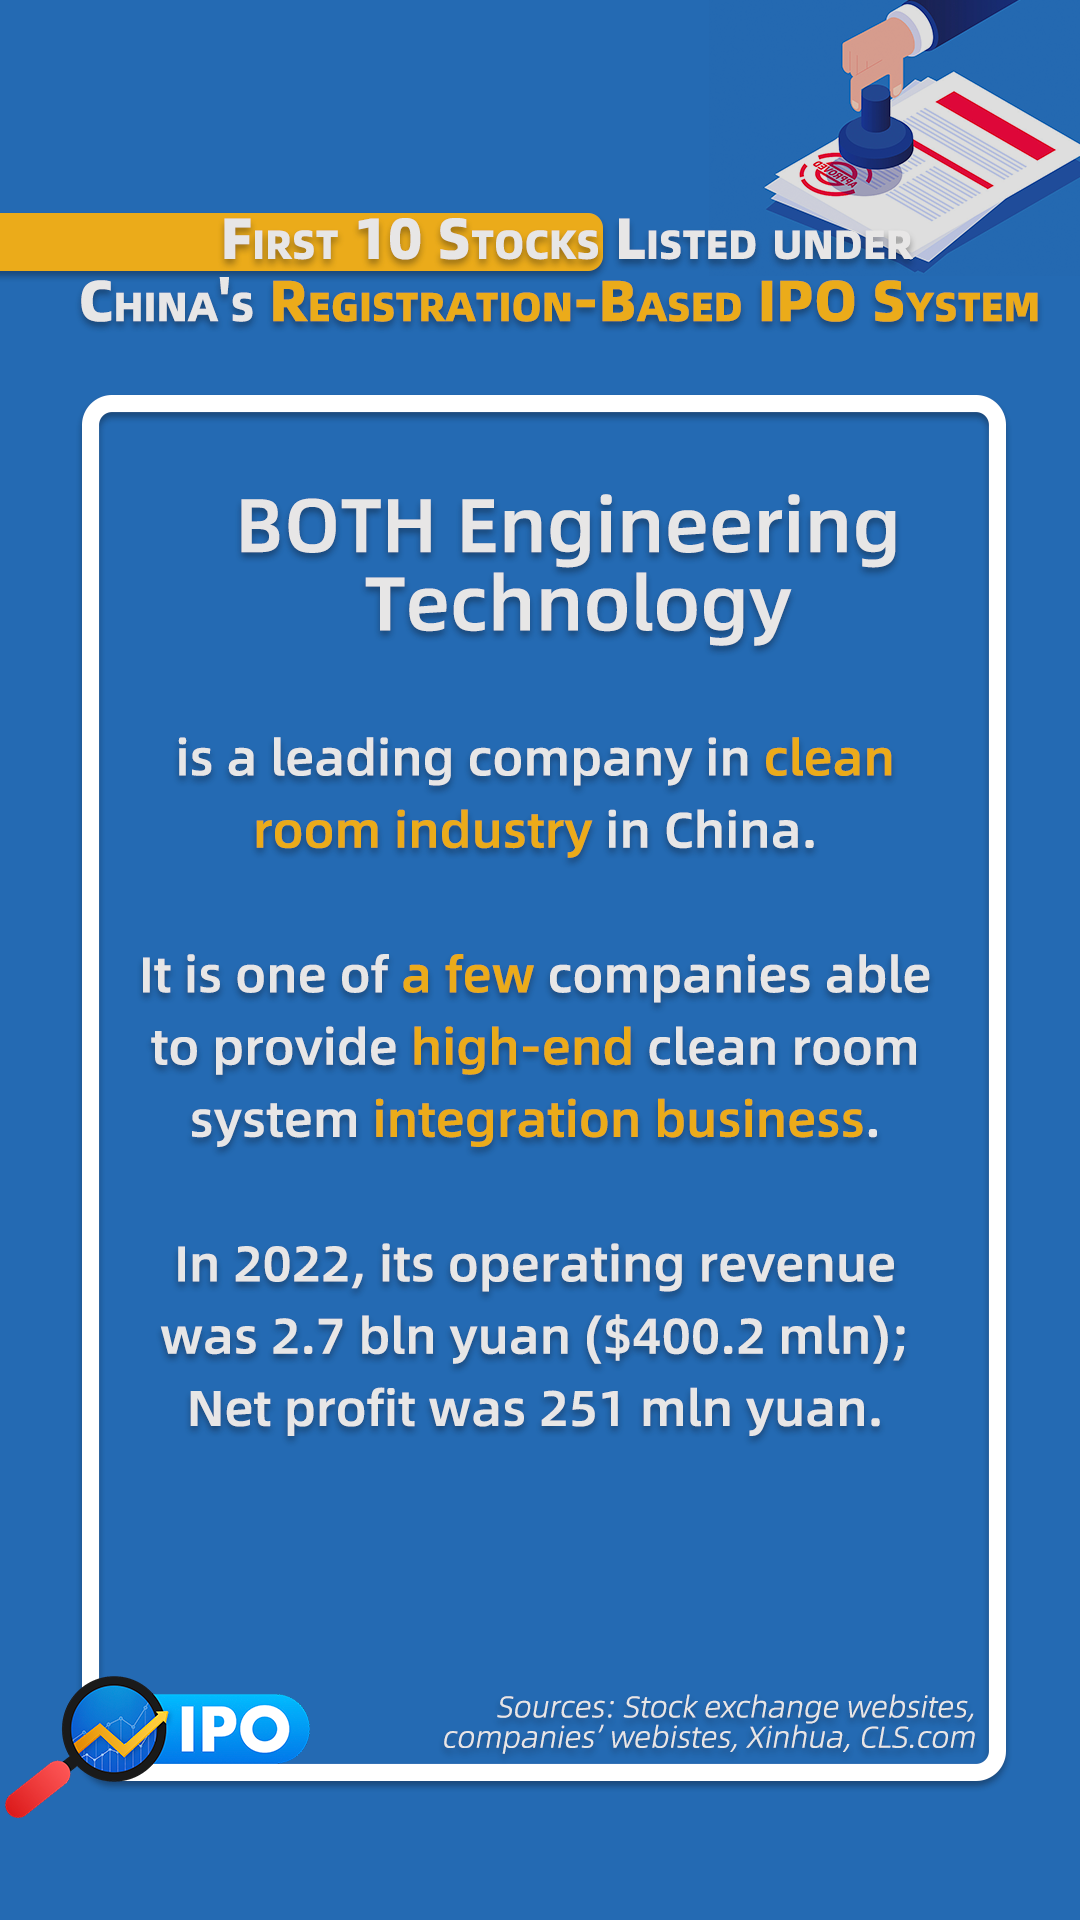 BOTH Engineering Technology, one of the 10 listed companies